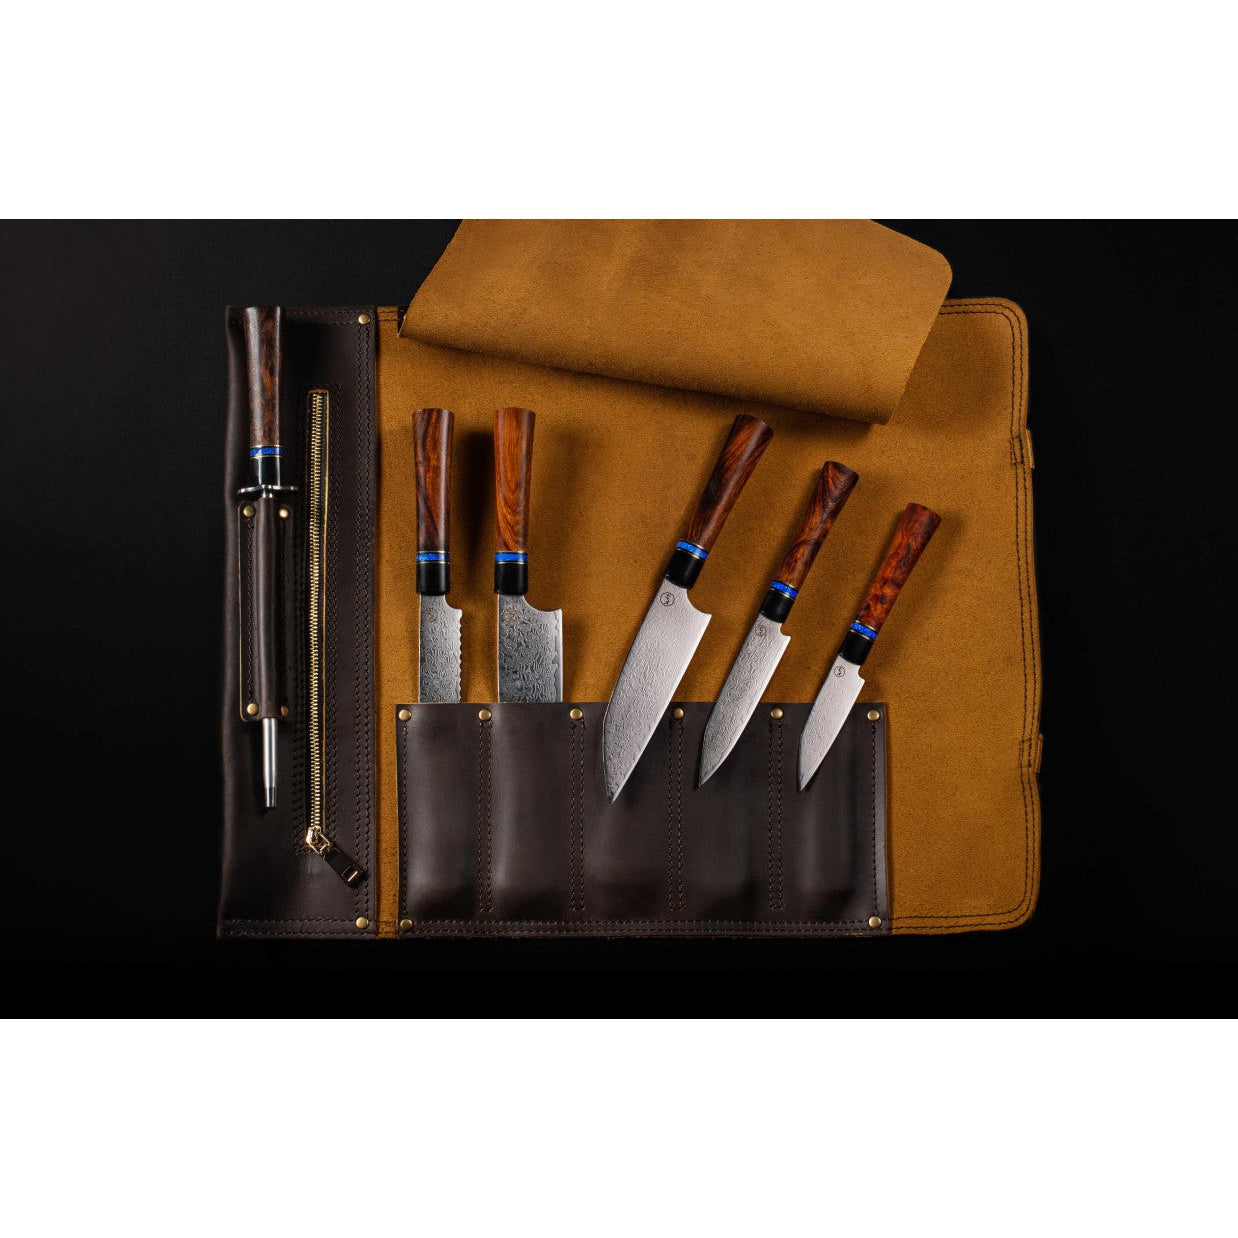 William Henry Kultro Ironwood Gourmet Knife Set-Knives & Tools-Kevin's Fine Outdoor Gear & Apparel